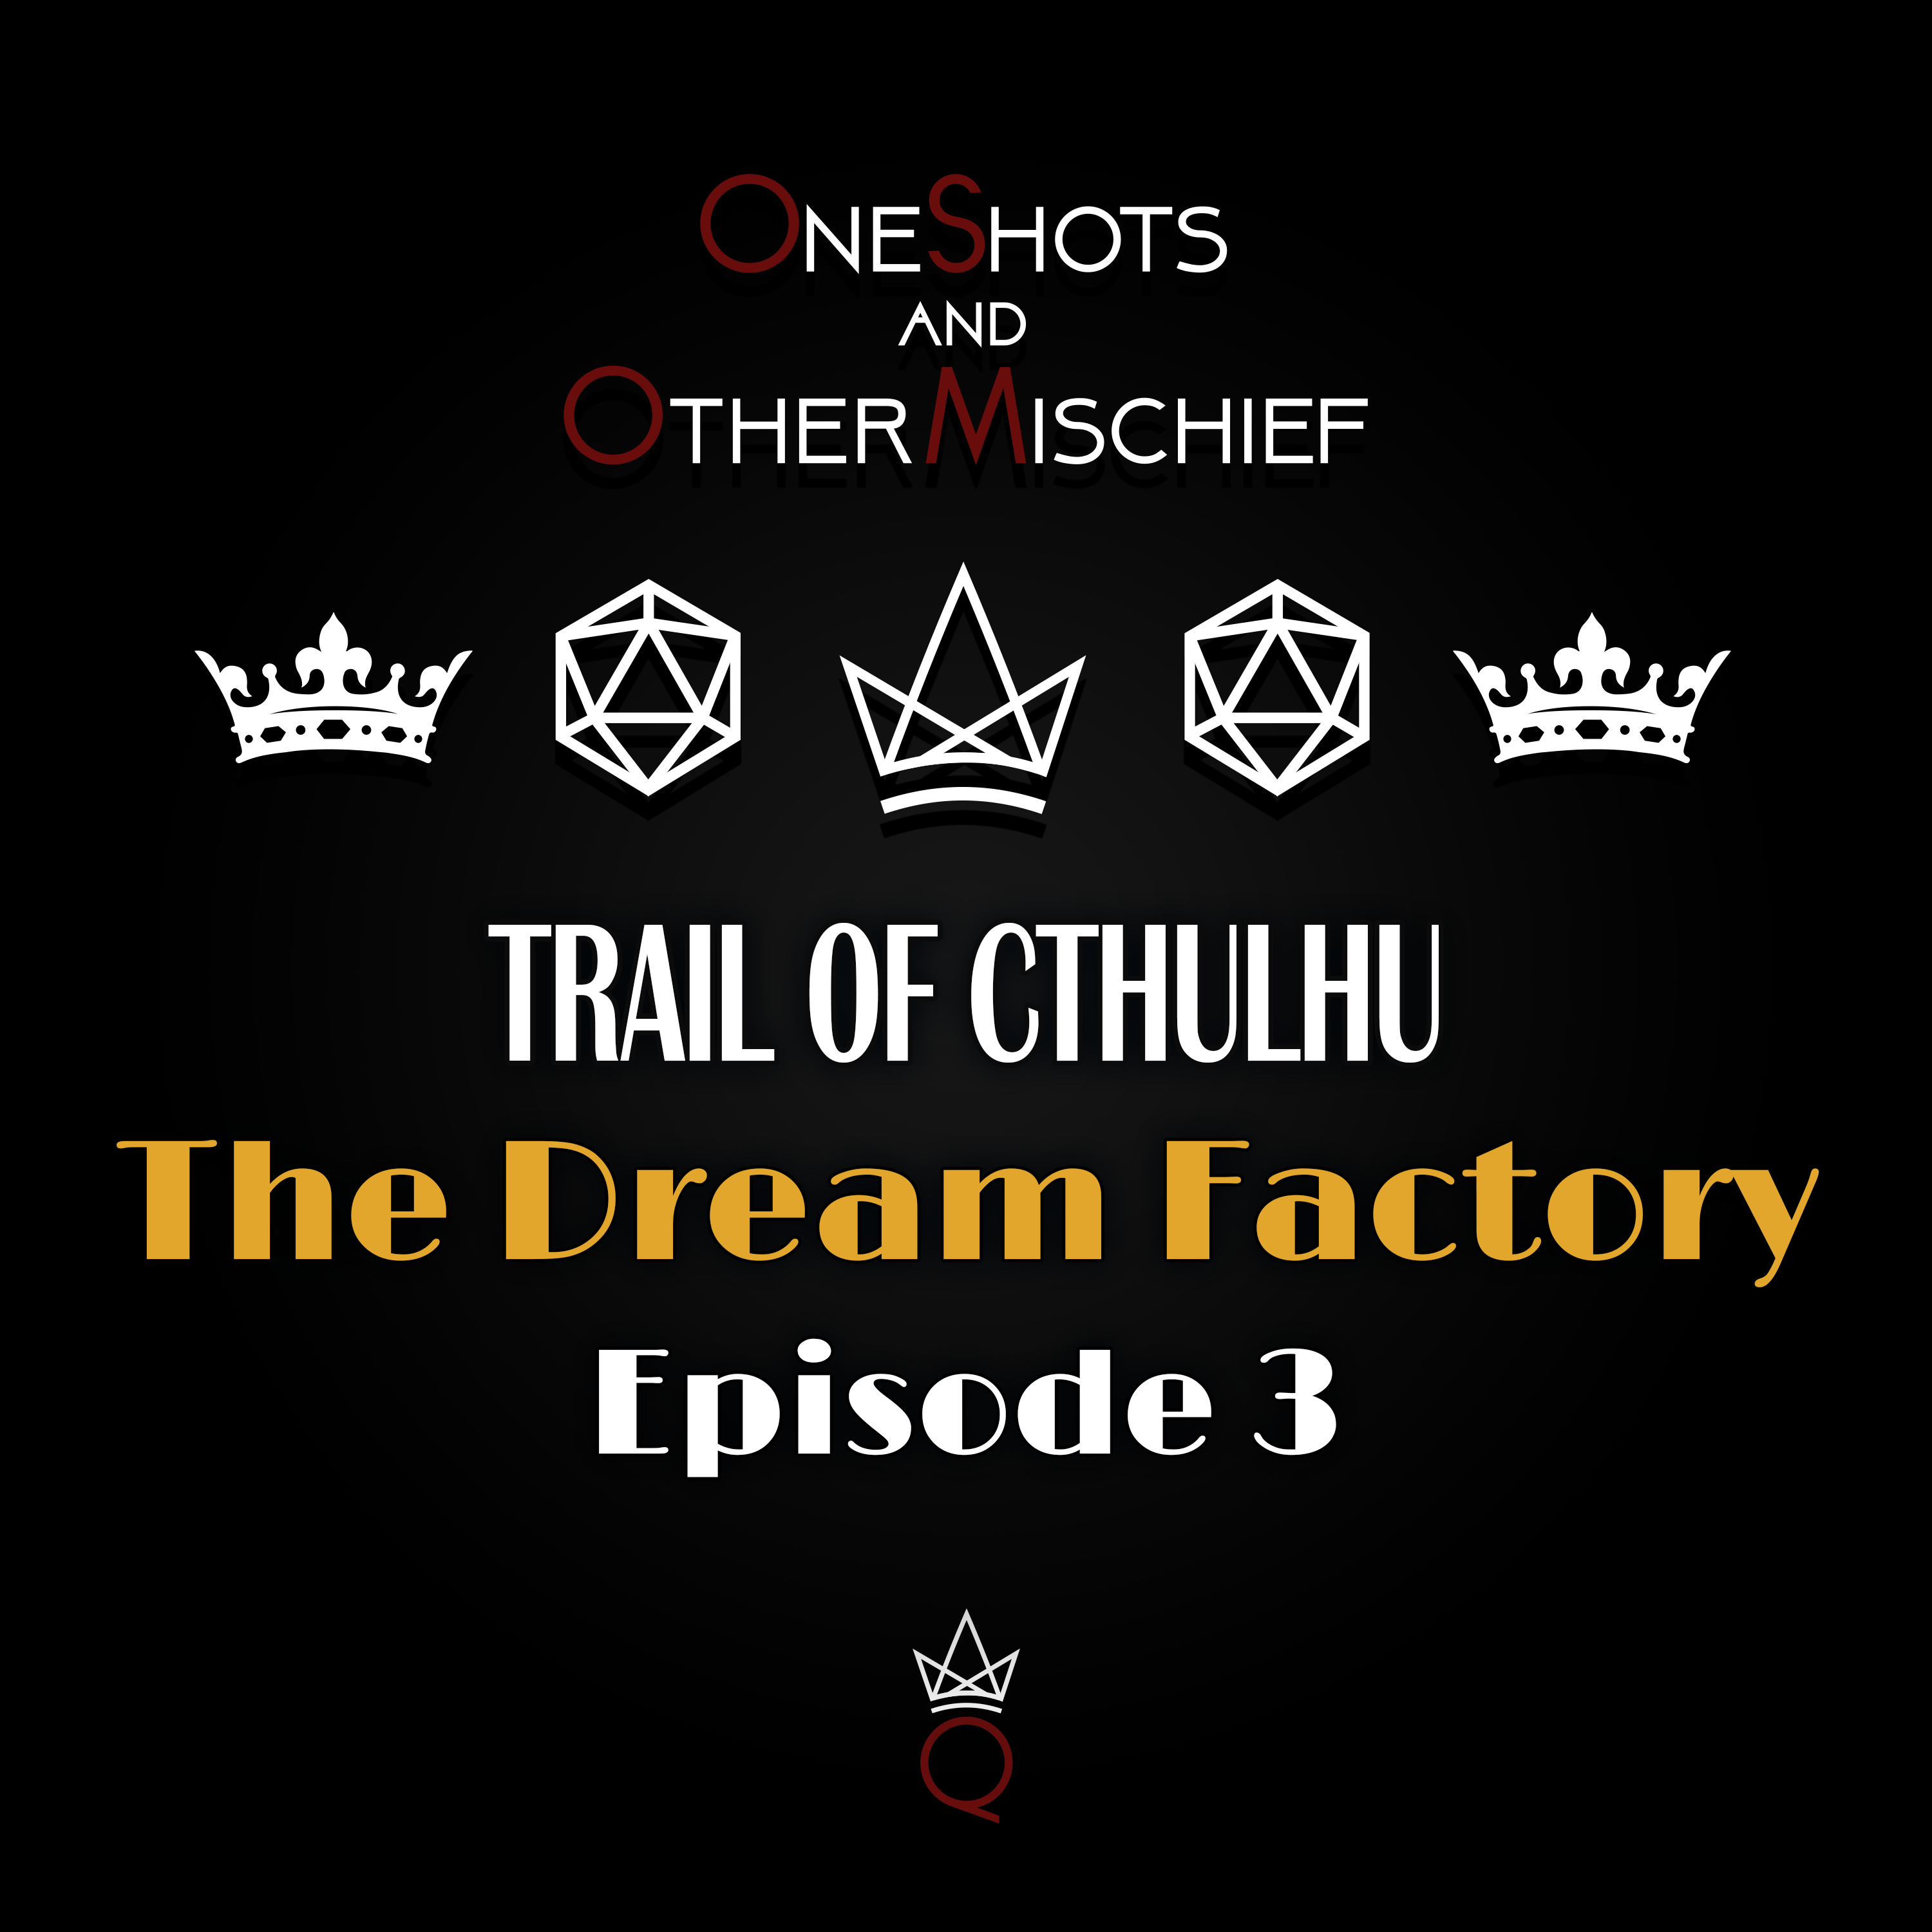 Trail of Cthulhu - The Dream Factory, Episode 3